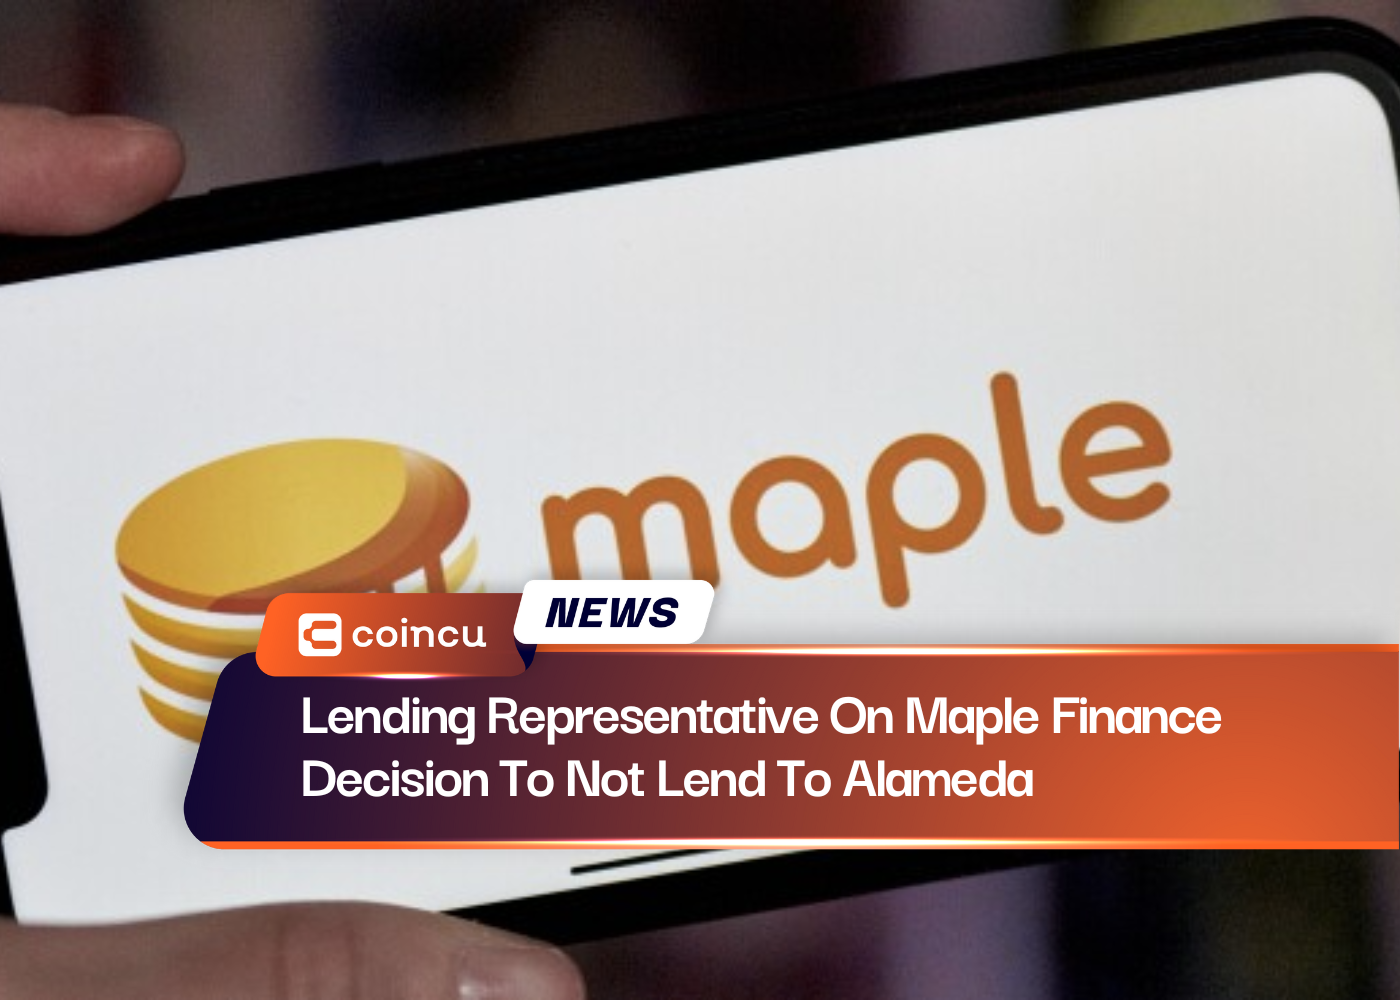 Lending Representative On Maple Finance Decision To Not Lend To Alameda